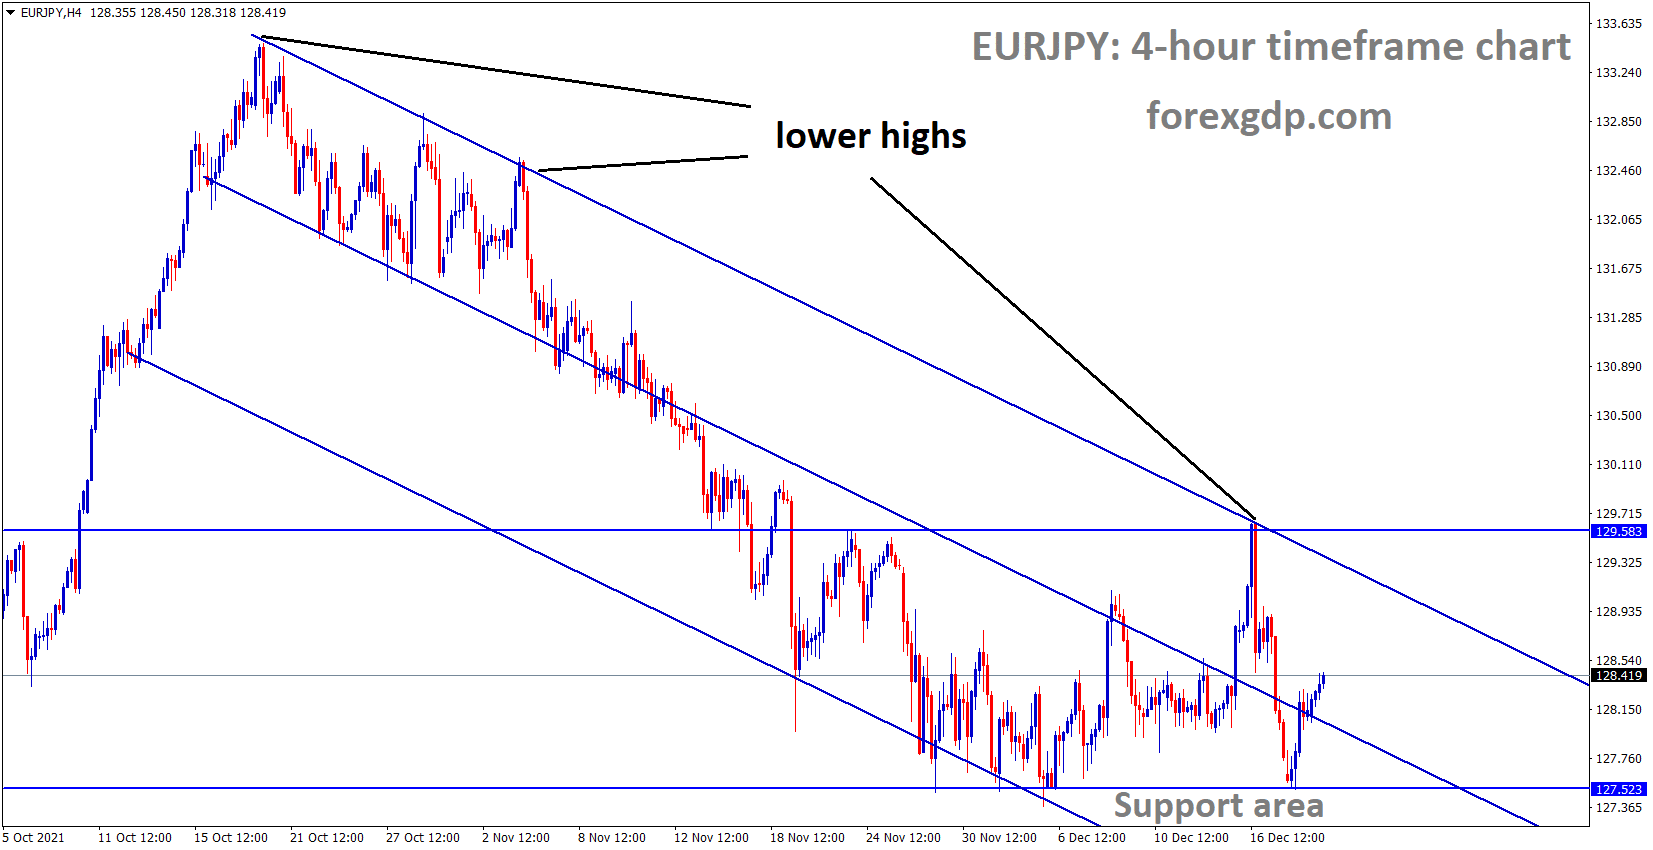 EURJPY is moving in the Descending channel and Box Pattern the market has rebounded from the Horizontal support area 1